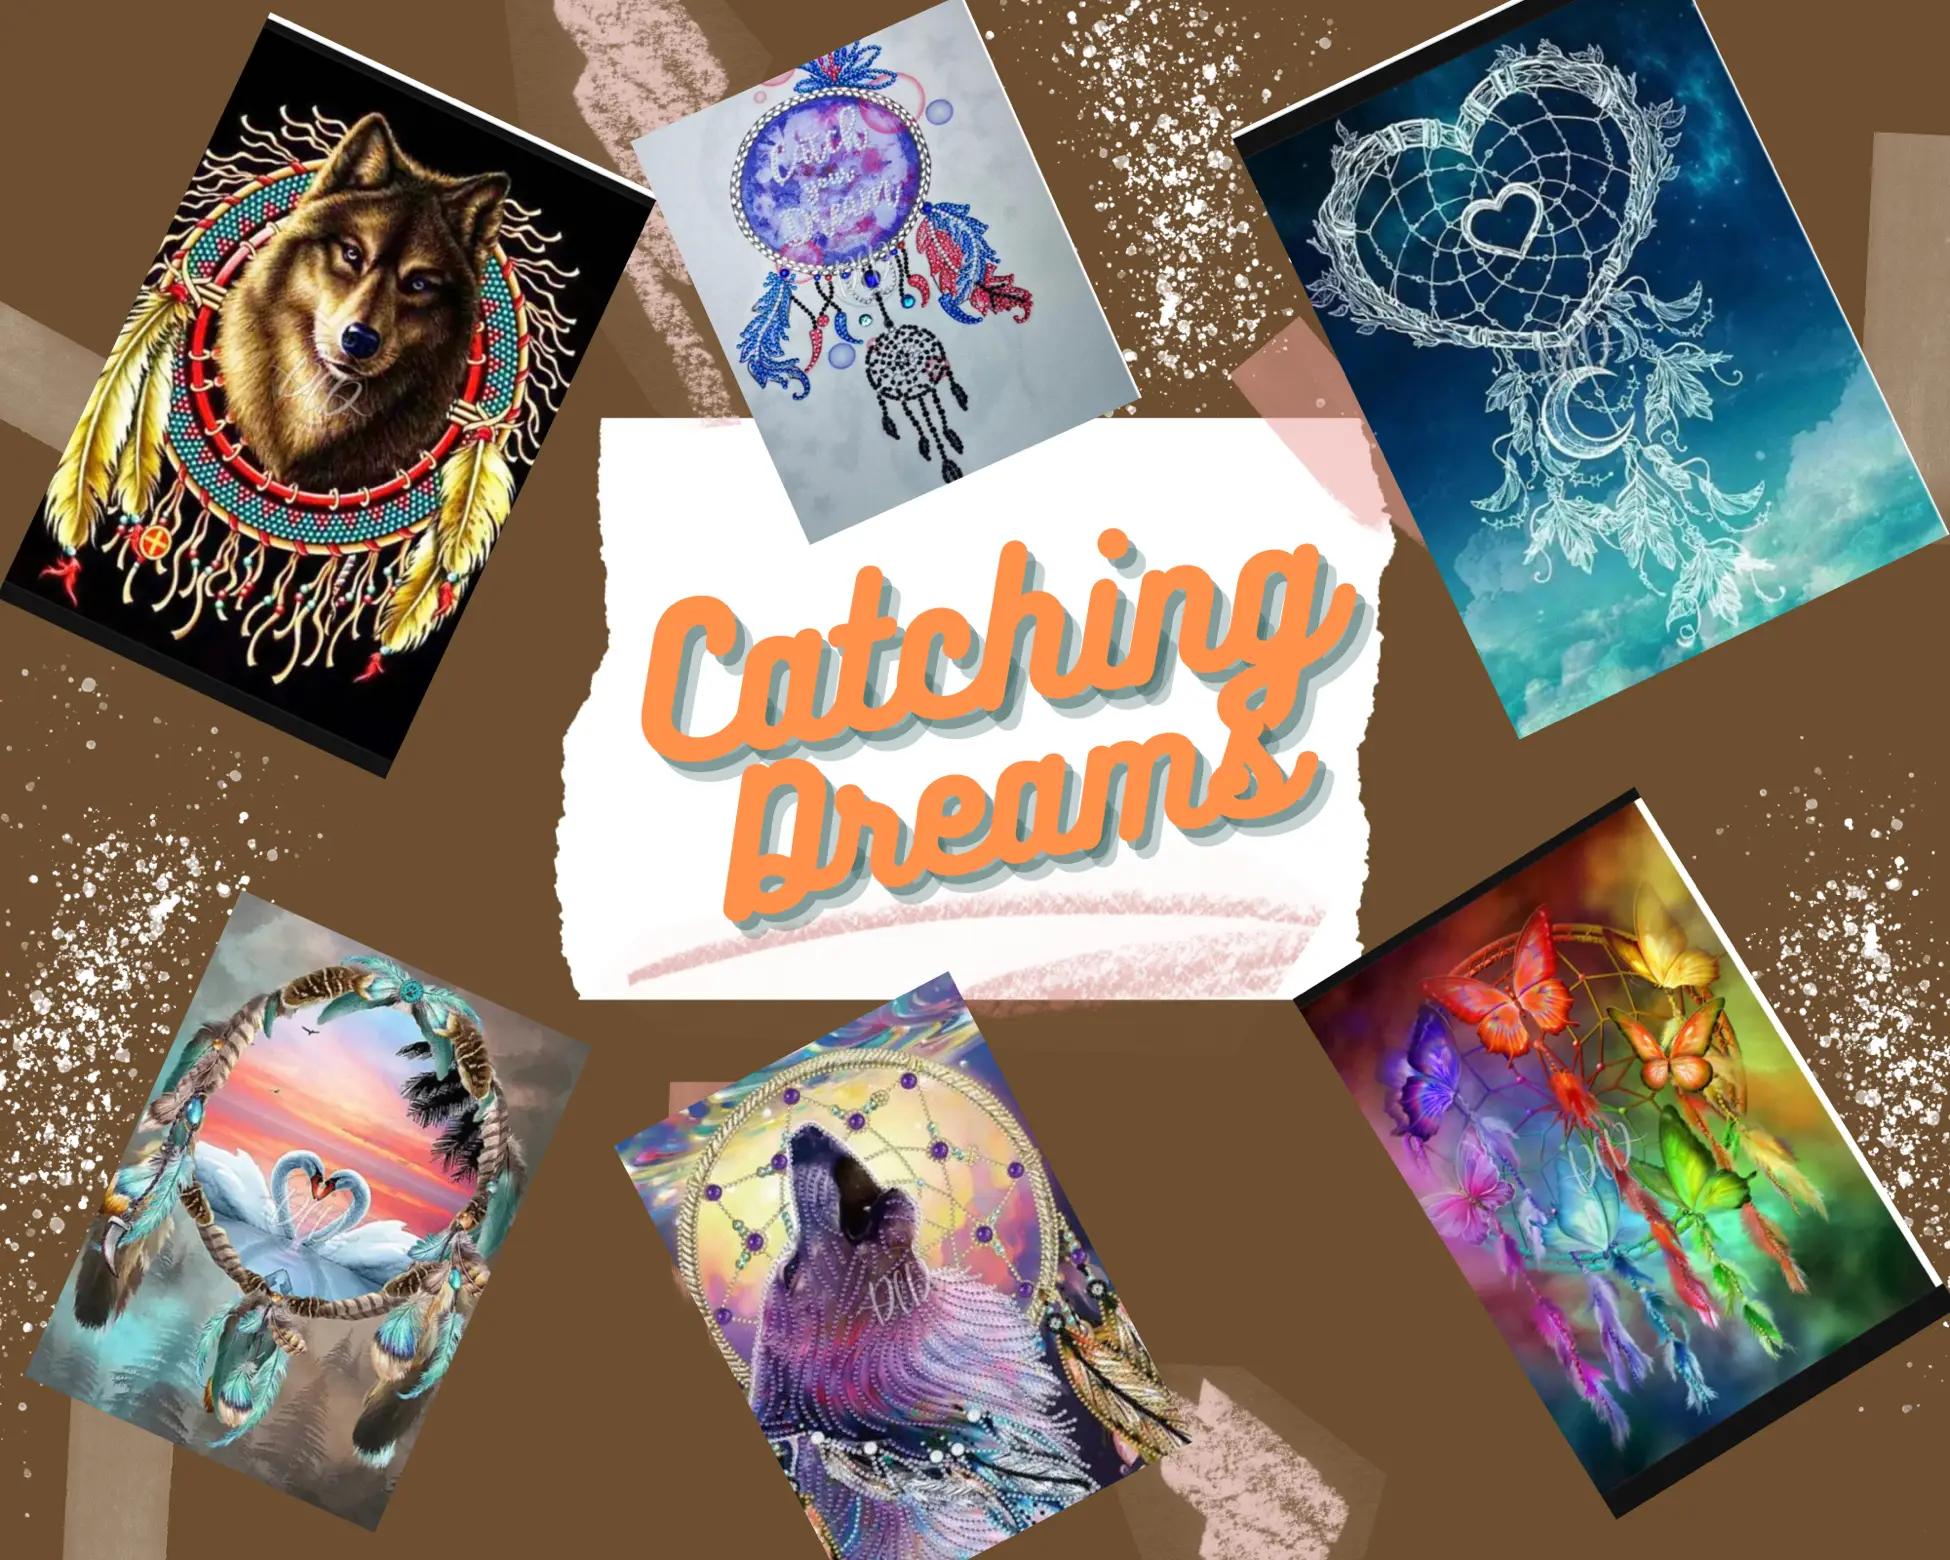 Catching dreams while diamond painting 😍, Gallery posted by Tiscia Grear